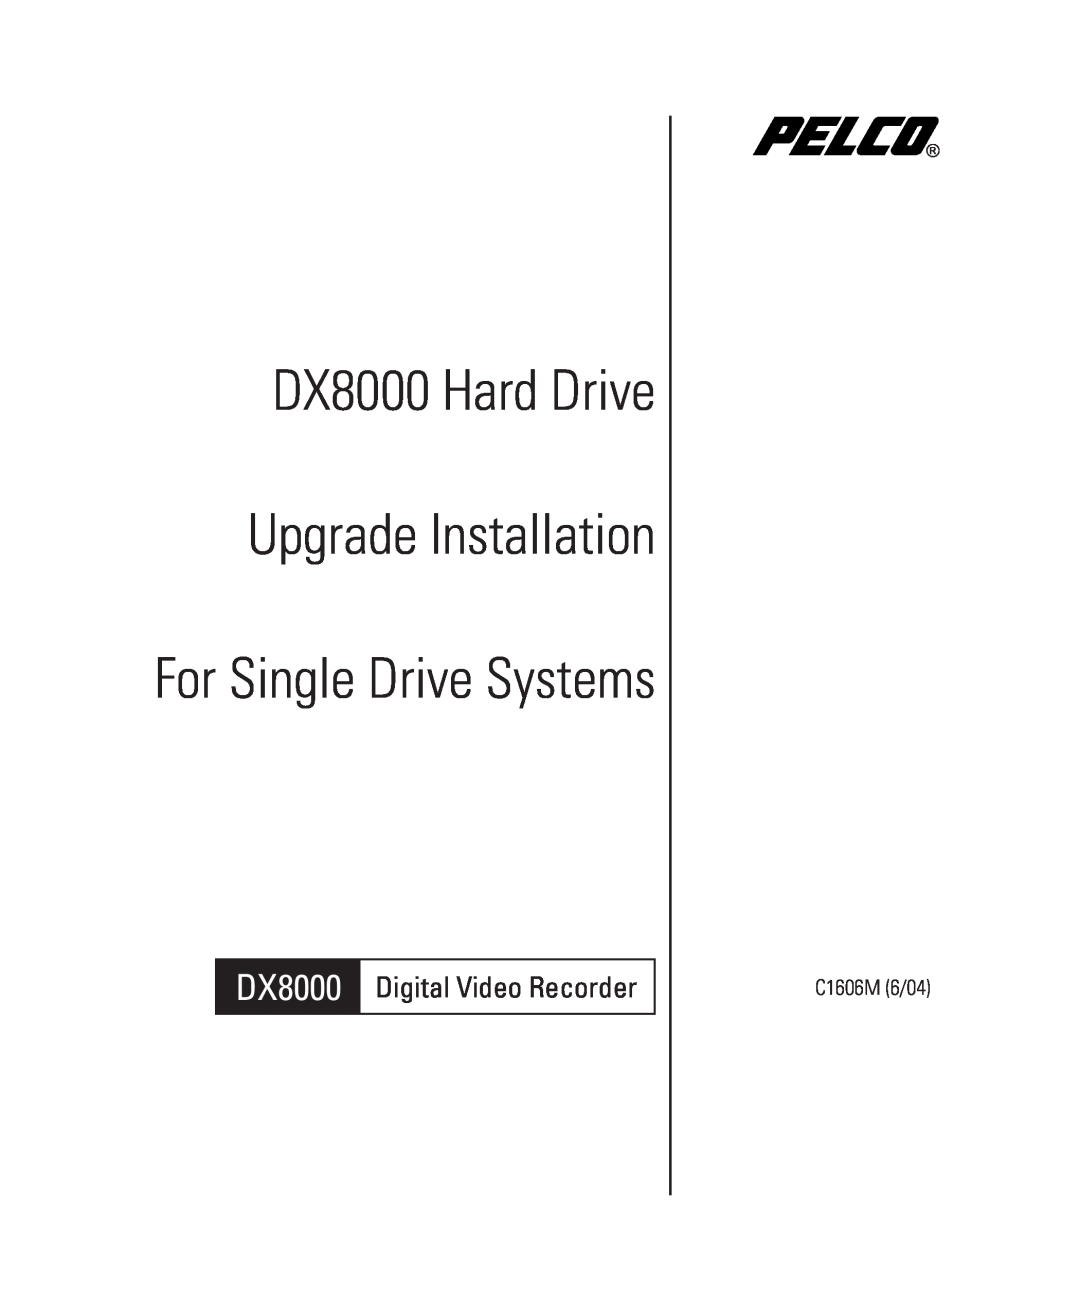 Pelco Dx8000 manual DX8000 Hard Drive Upgrade Installation, to a Four-DriveSystem, Digital Video Recorder, C1609M 6/04 